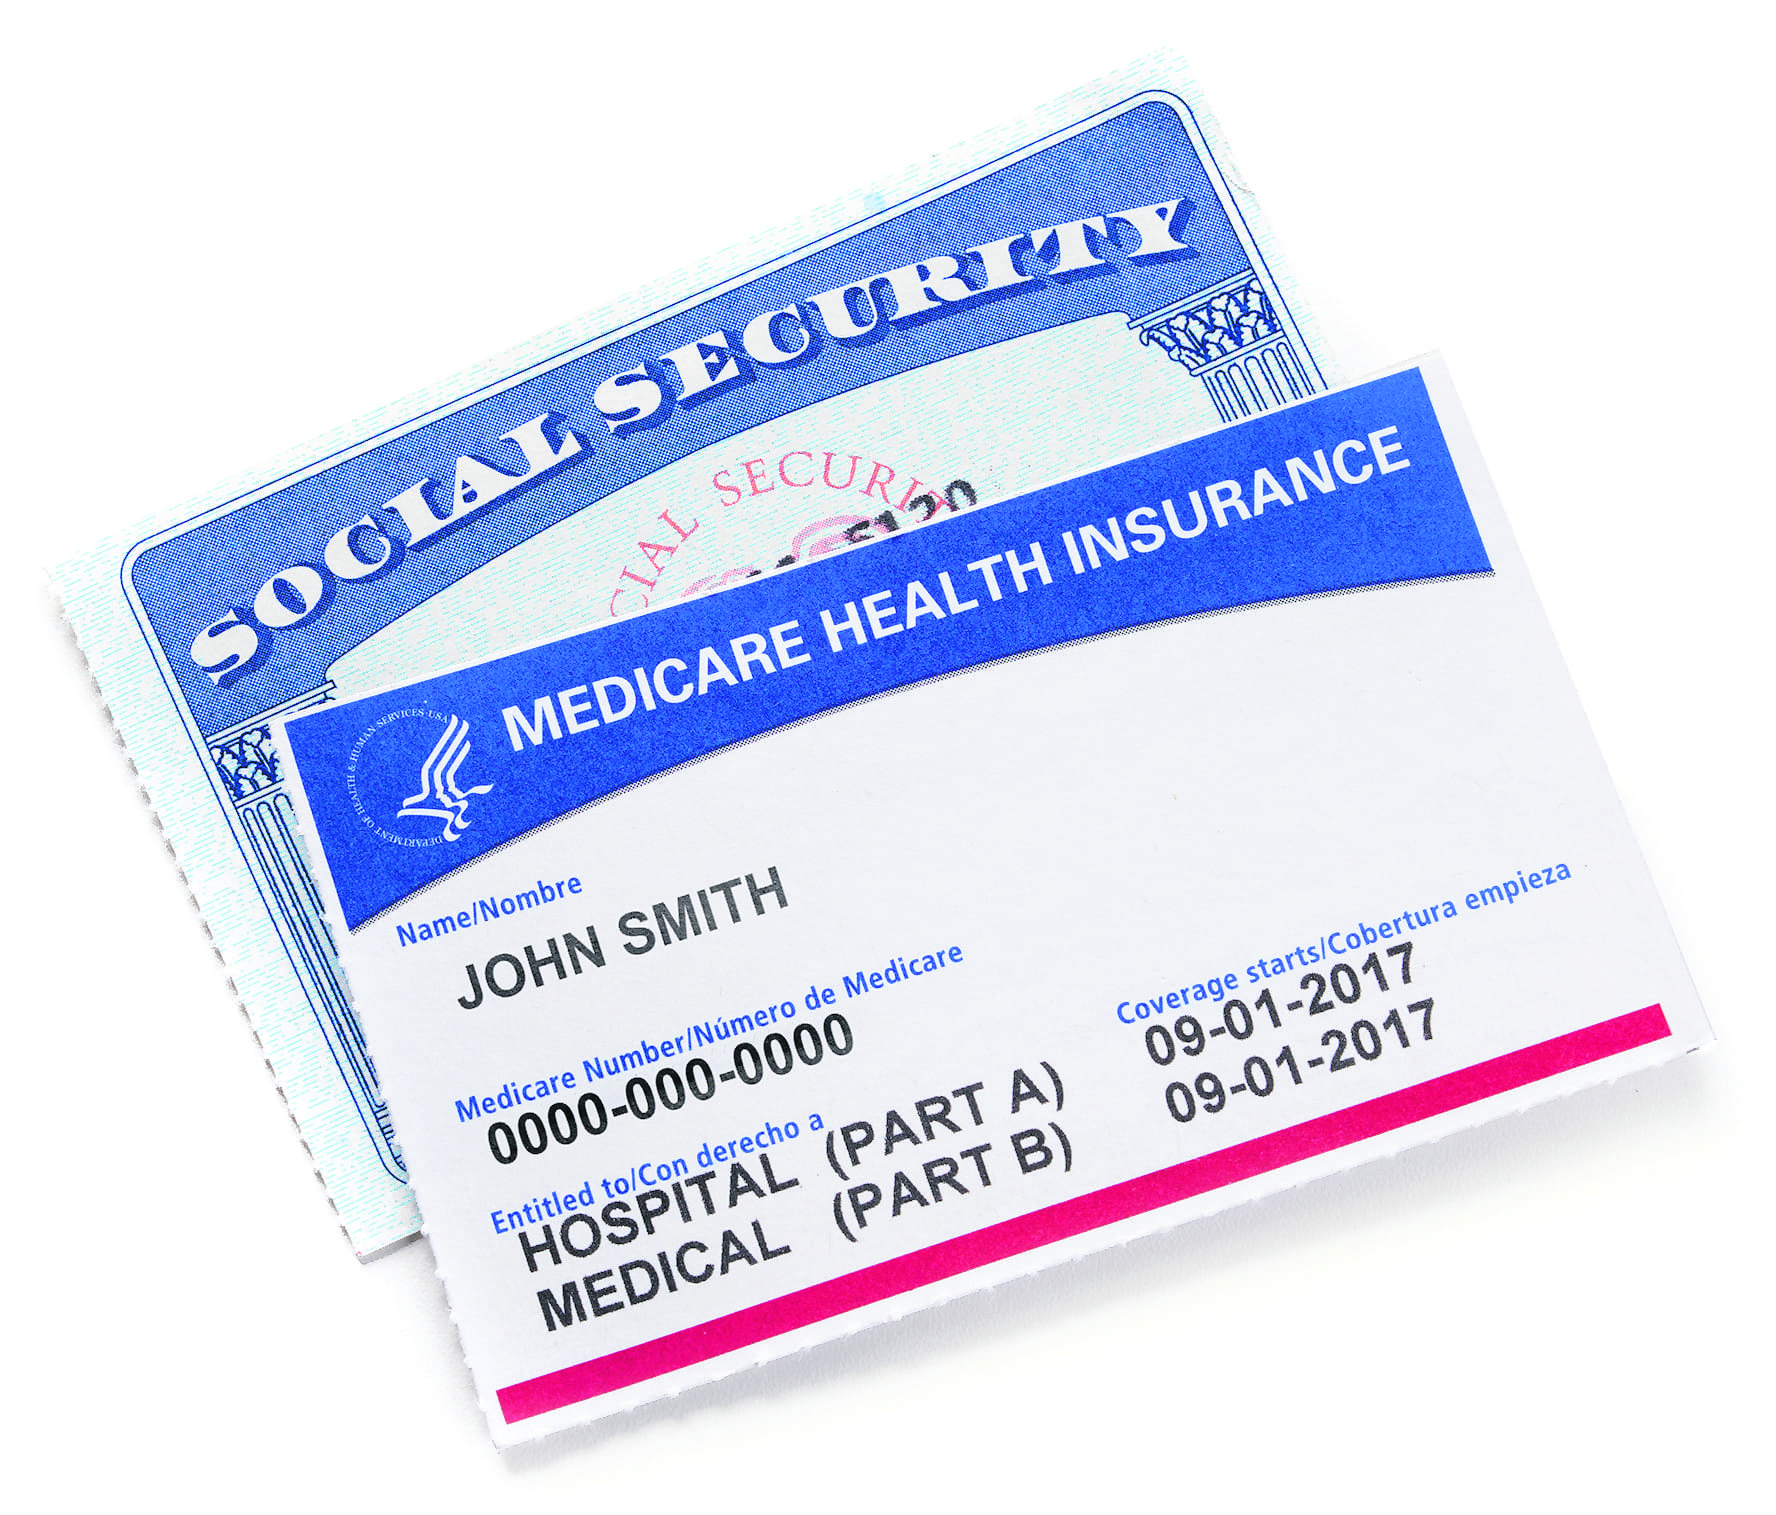 Medicare is a national health insurance program provided by the United States for seniors 65 and older. It began in 1966.